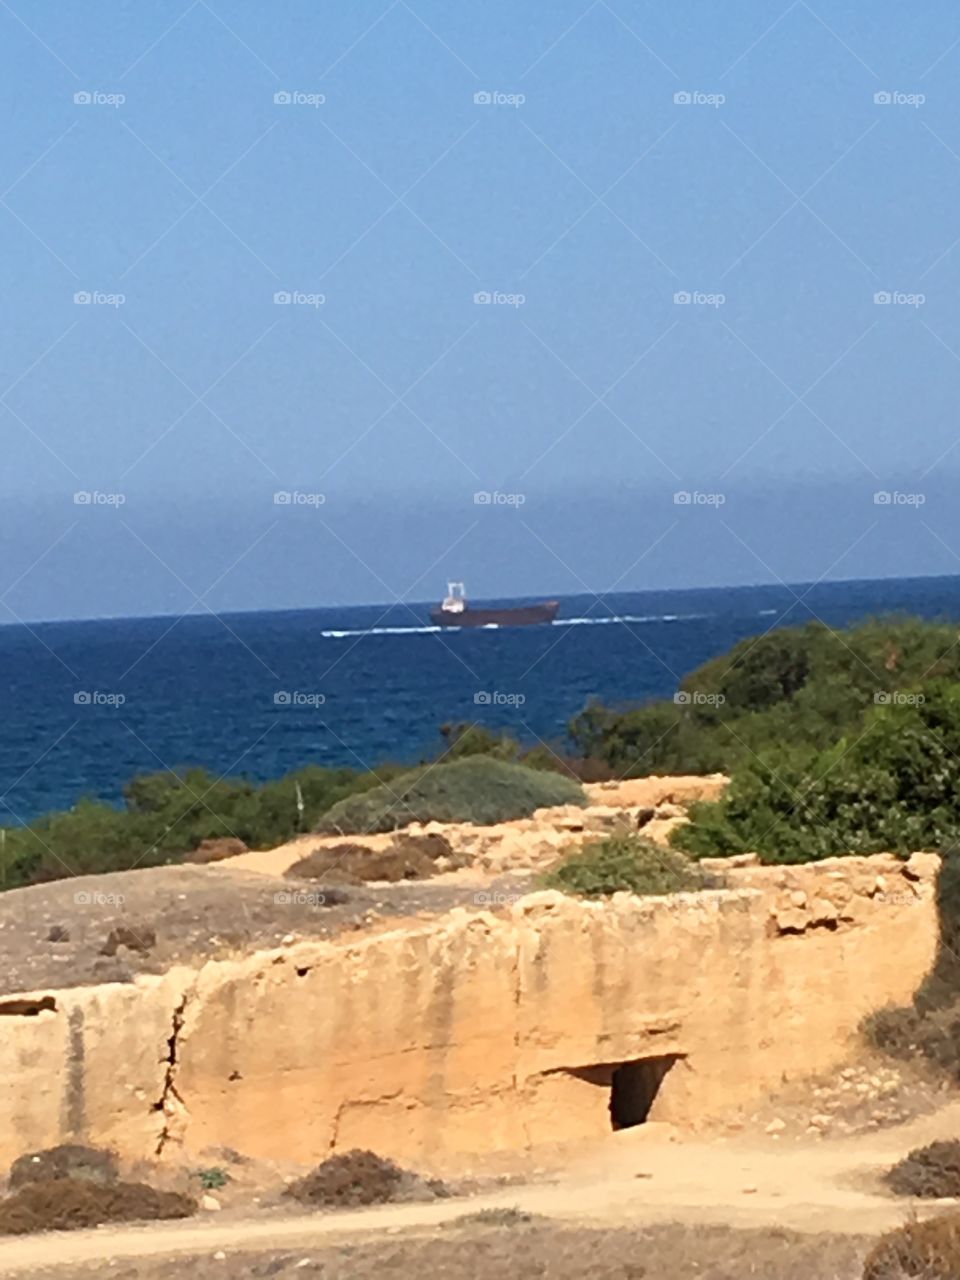 A ship wreck in Cyprus taken from a distance 